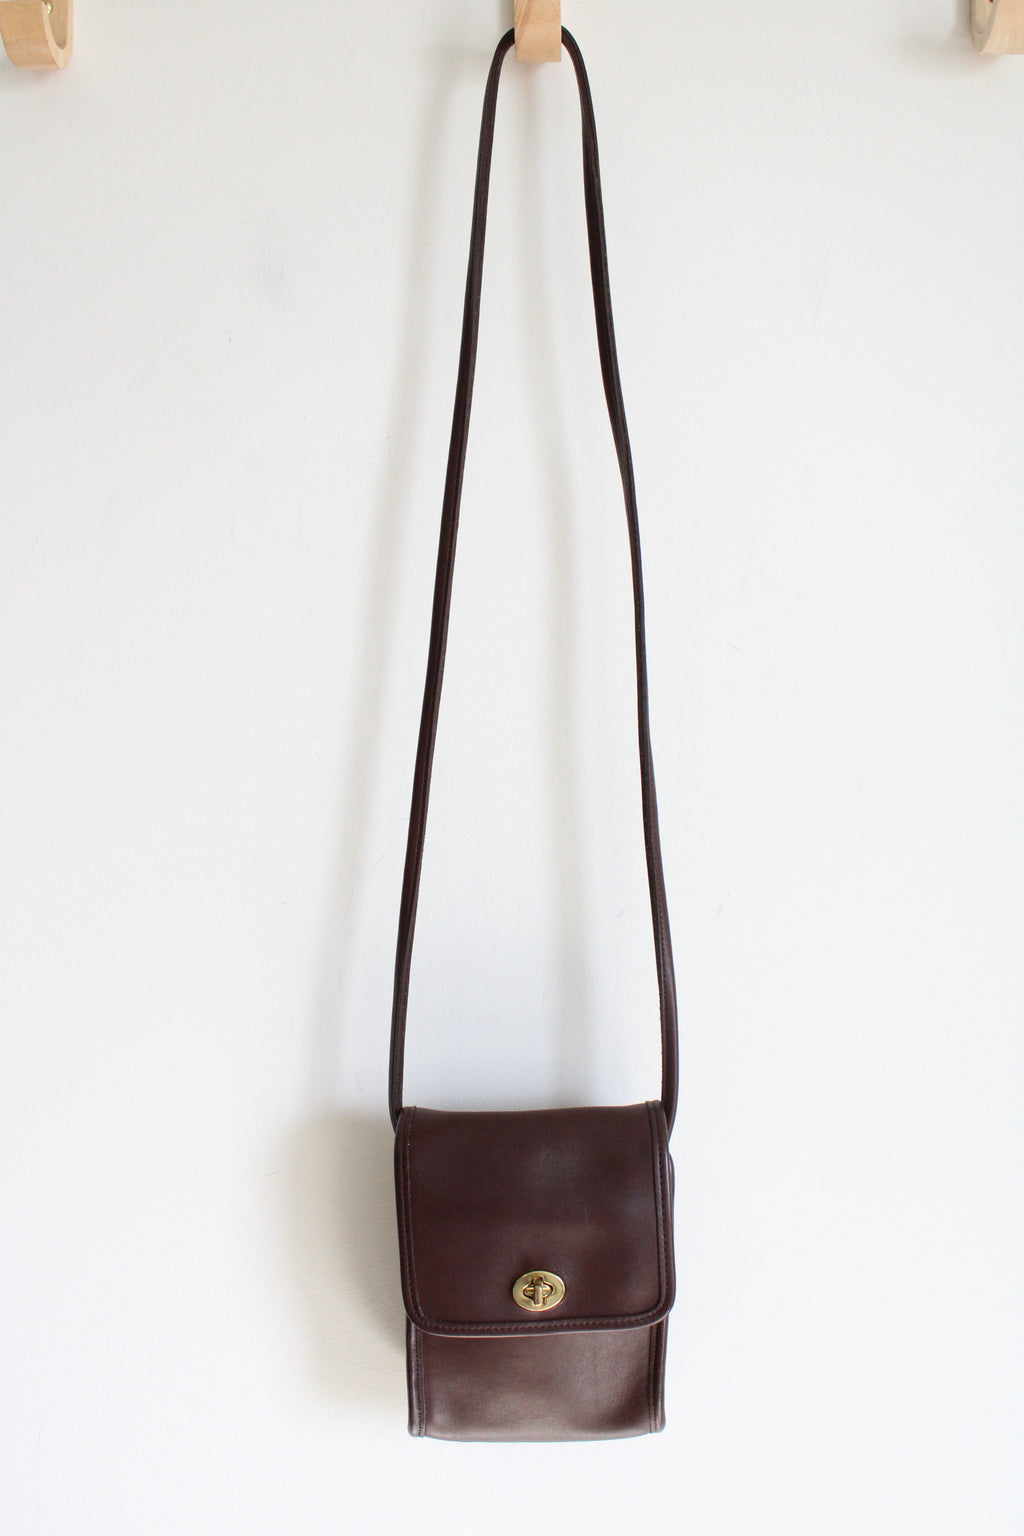 Coach Vintage Brown Scooter Crossbody Purse